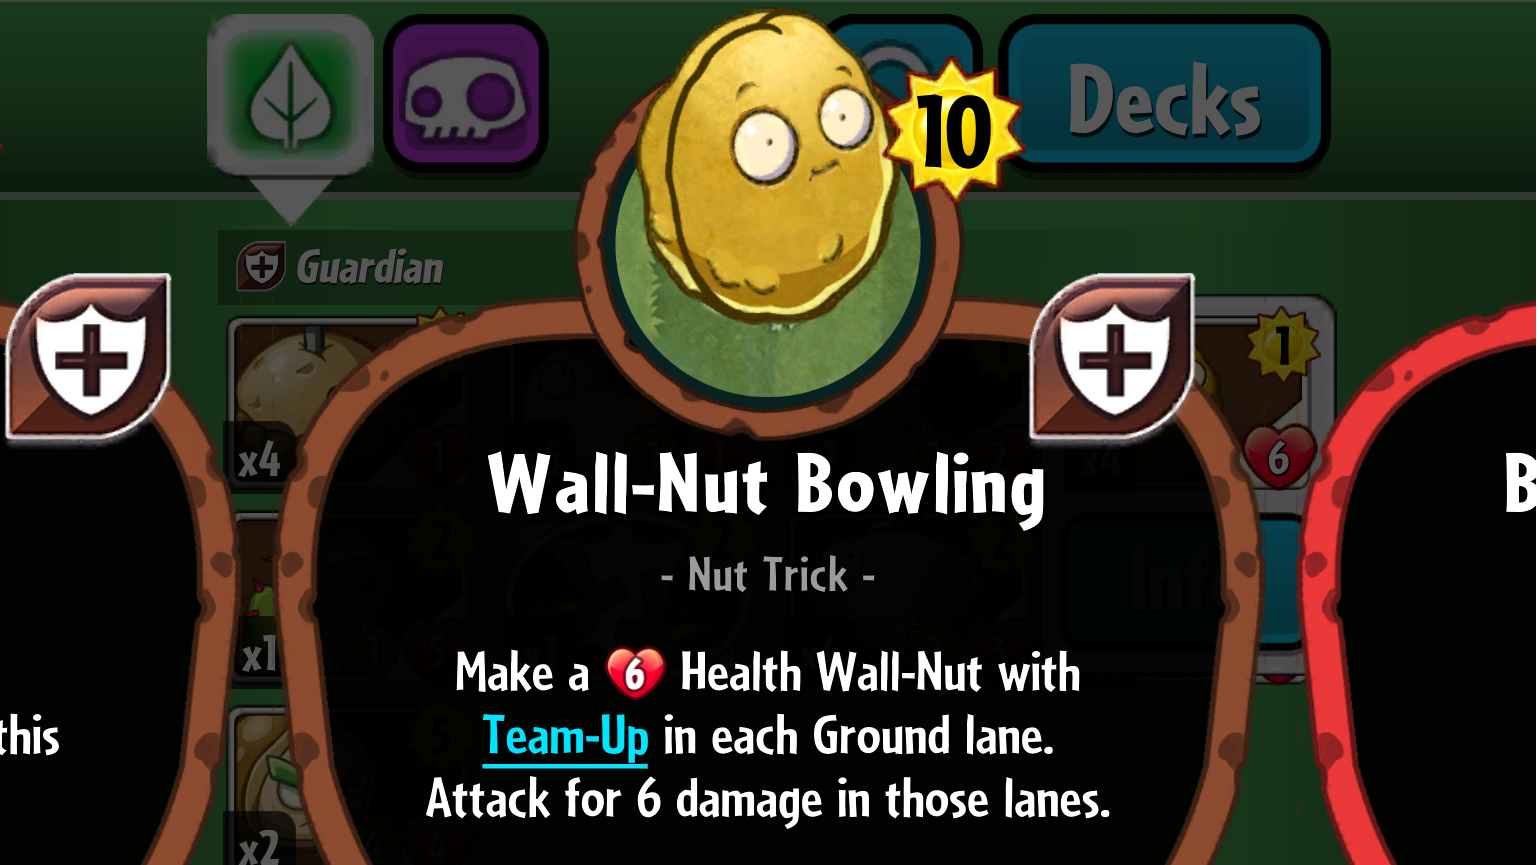 Plants vs. Zombies Heroes Wall-Nut Bowling